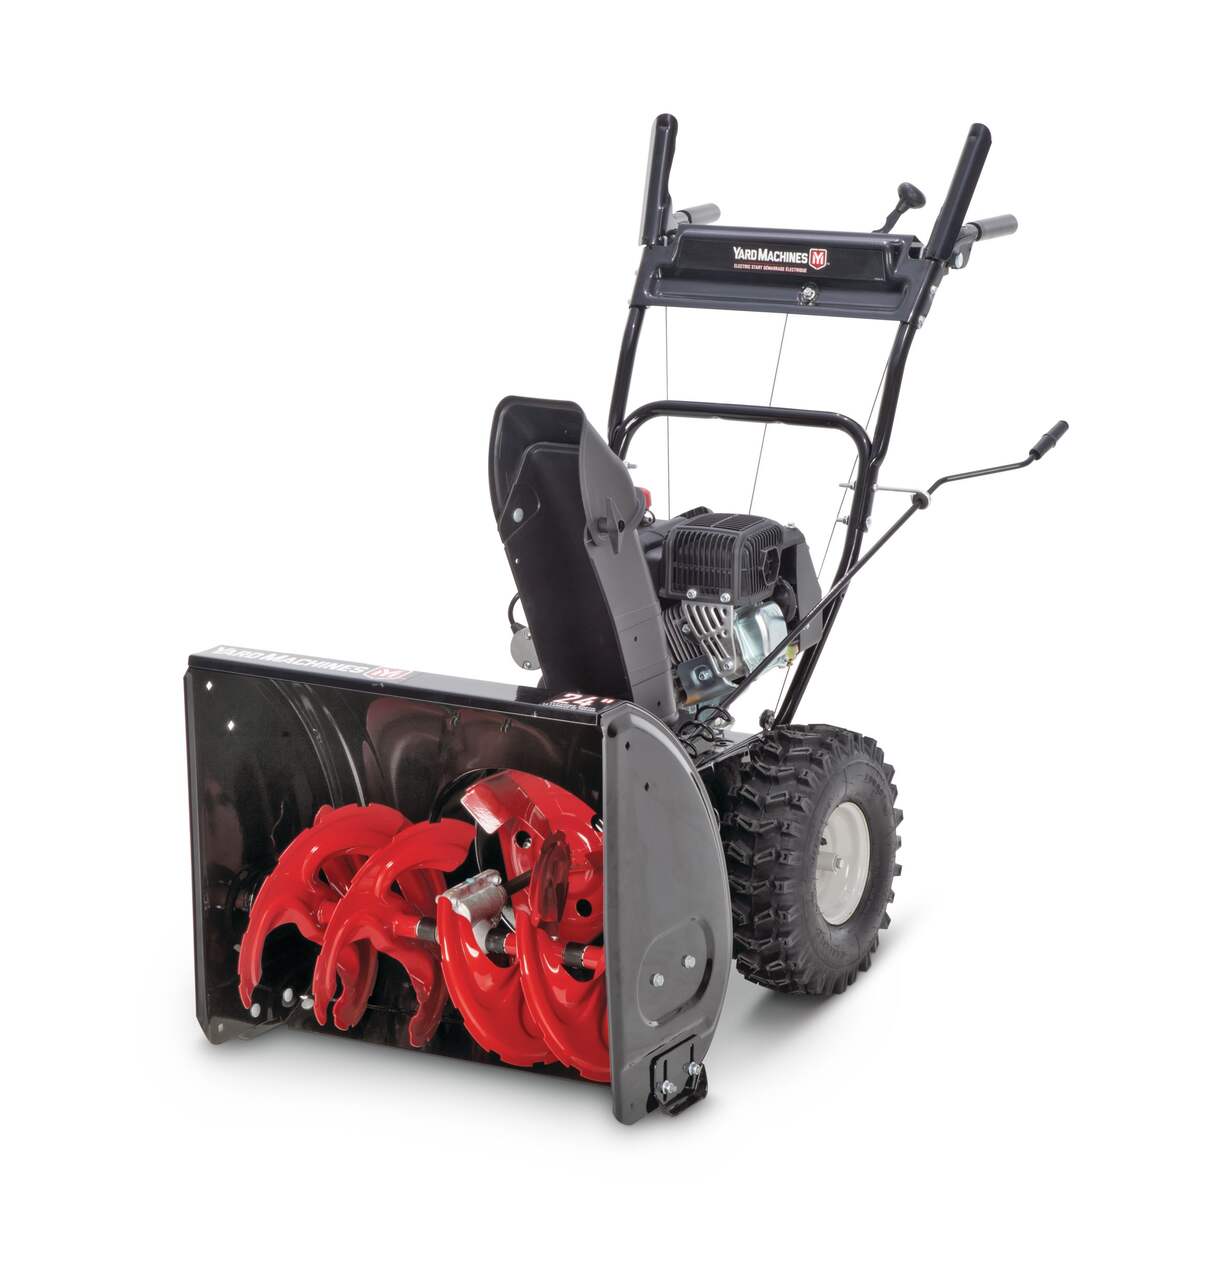 https://media-www.canadiantire.ca/product/seasonal-gardening/outdoor-tools/snowblowers/0601343/yard-machines-208cc-2-stage-snowblower-24--2f5b6cce-924c-4220-bb9f-a22d91bc2cb9-jpgrendition.jpg?imdensity=1&imwidth=640&impolicy=mZoom